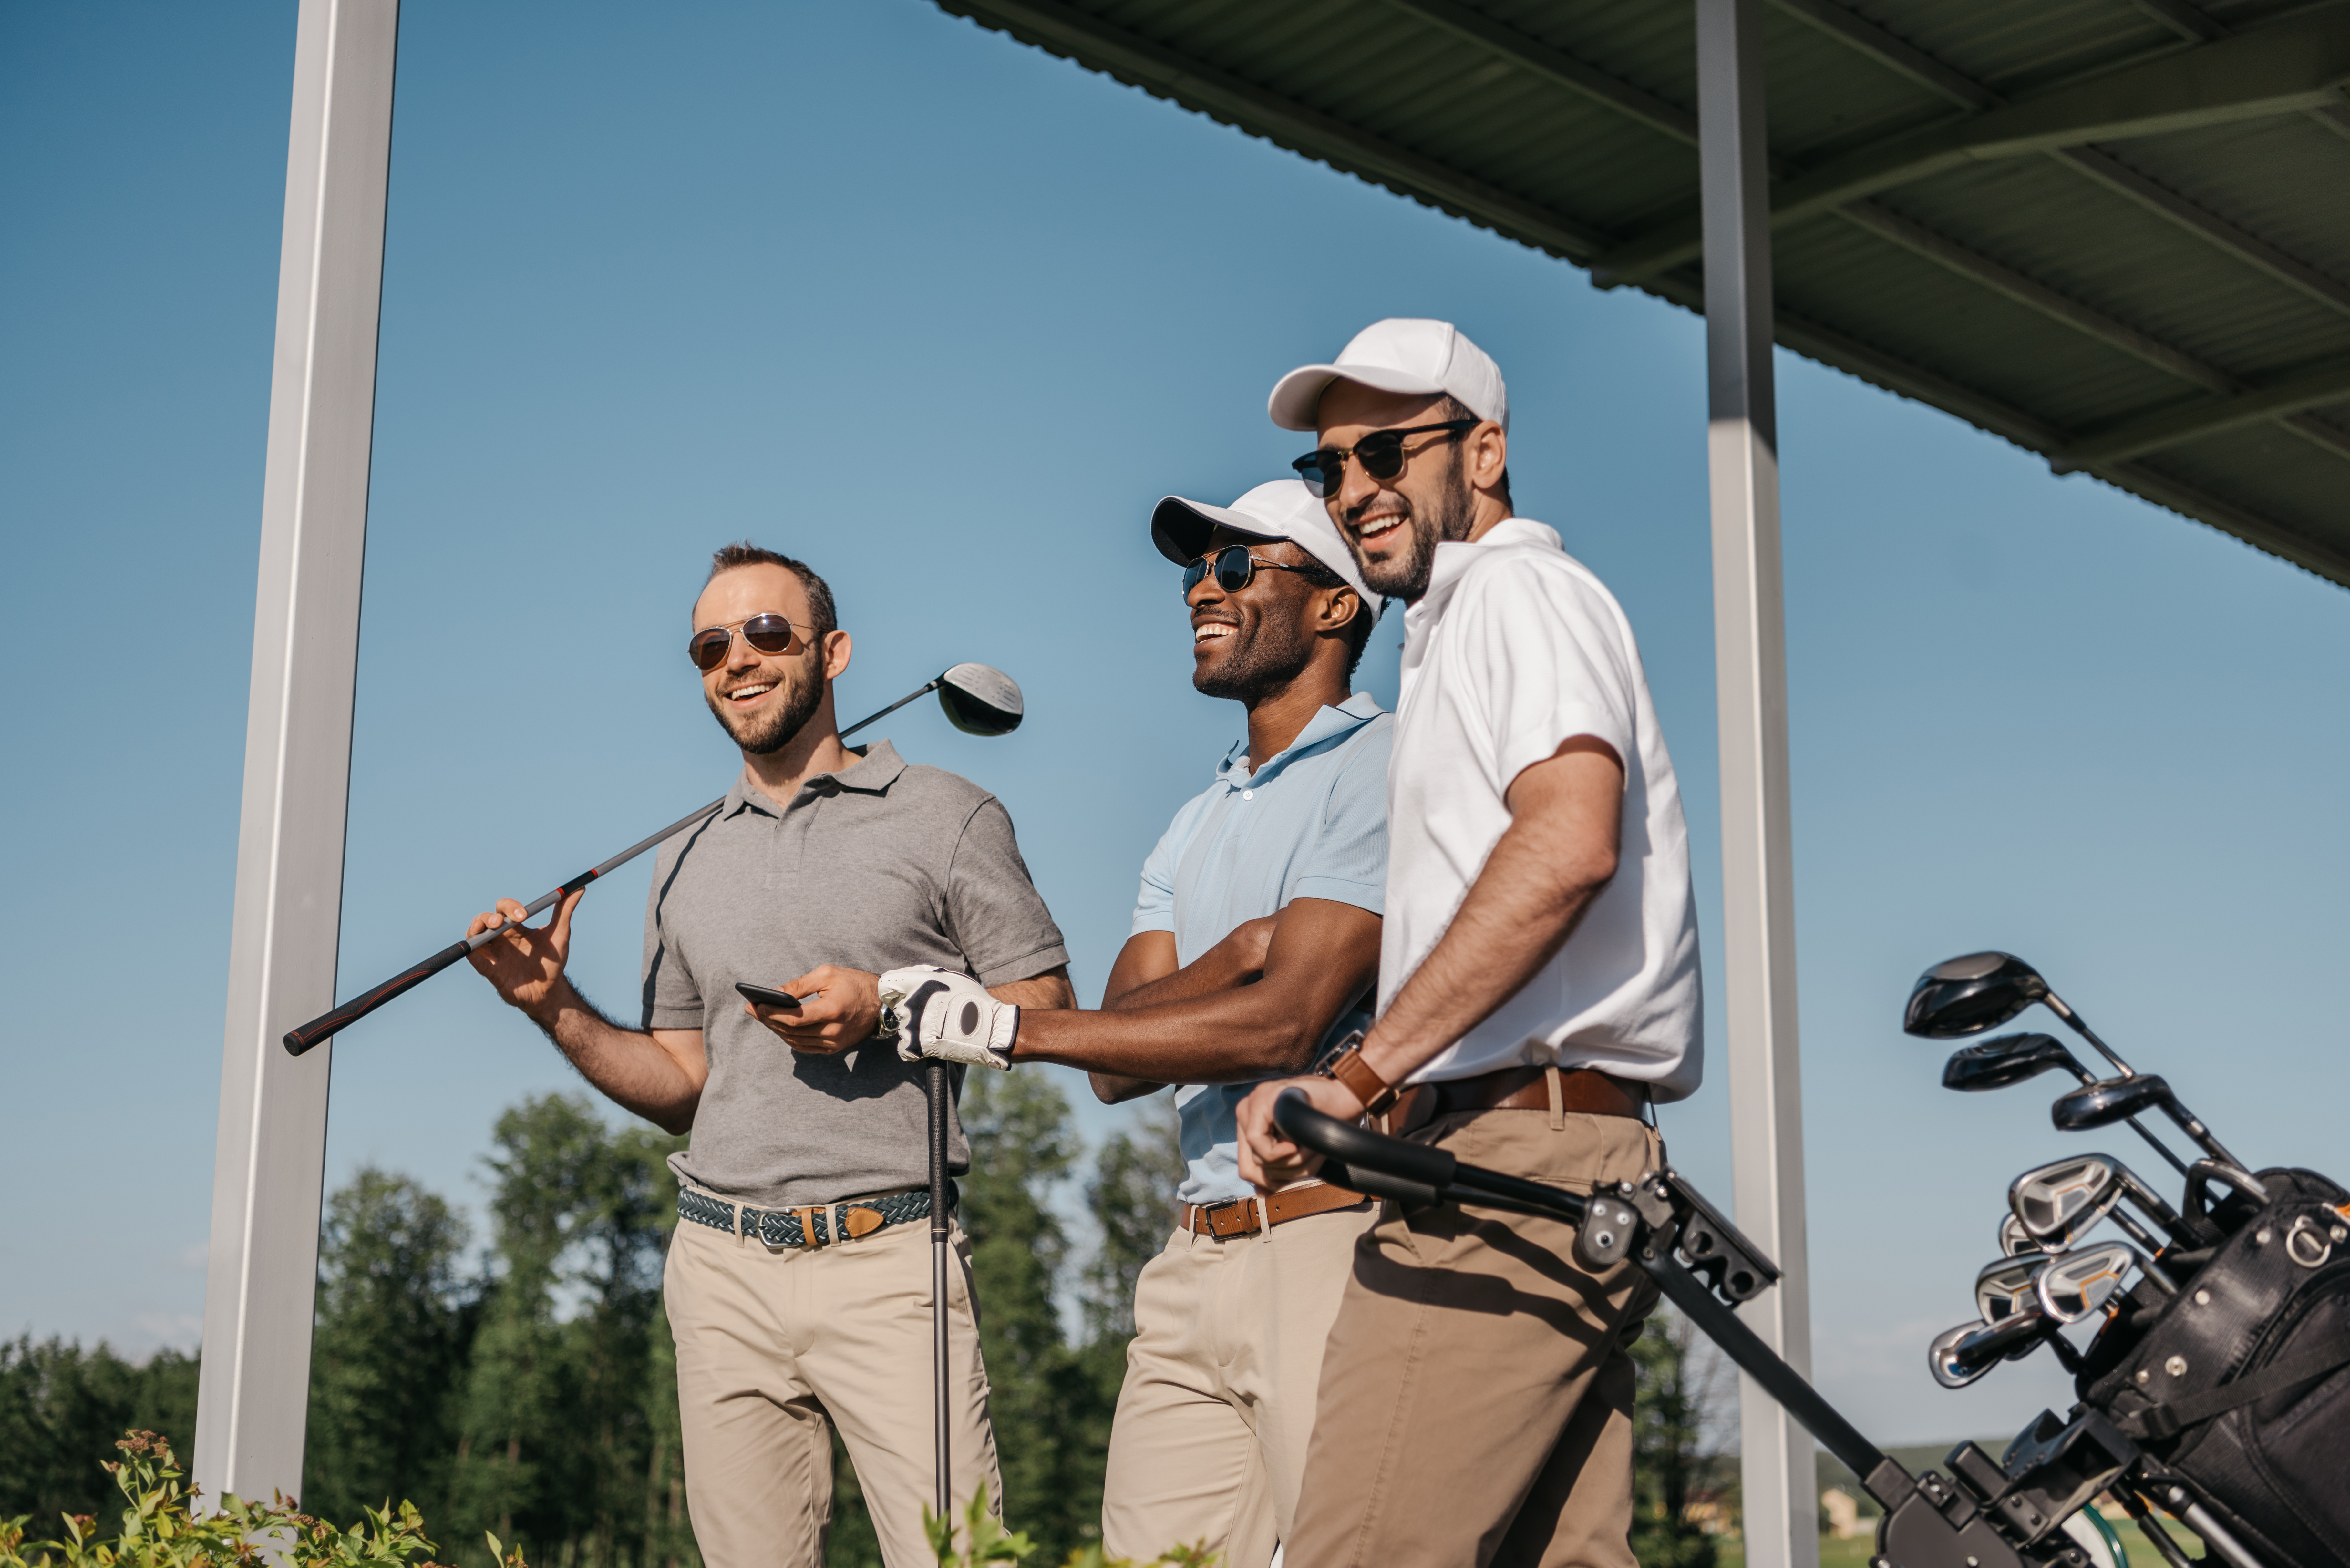 How To Attract Millennials To Golf | Dana Communications